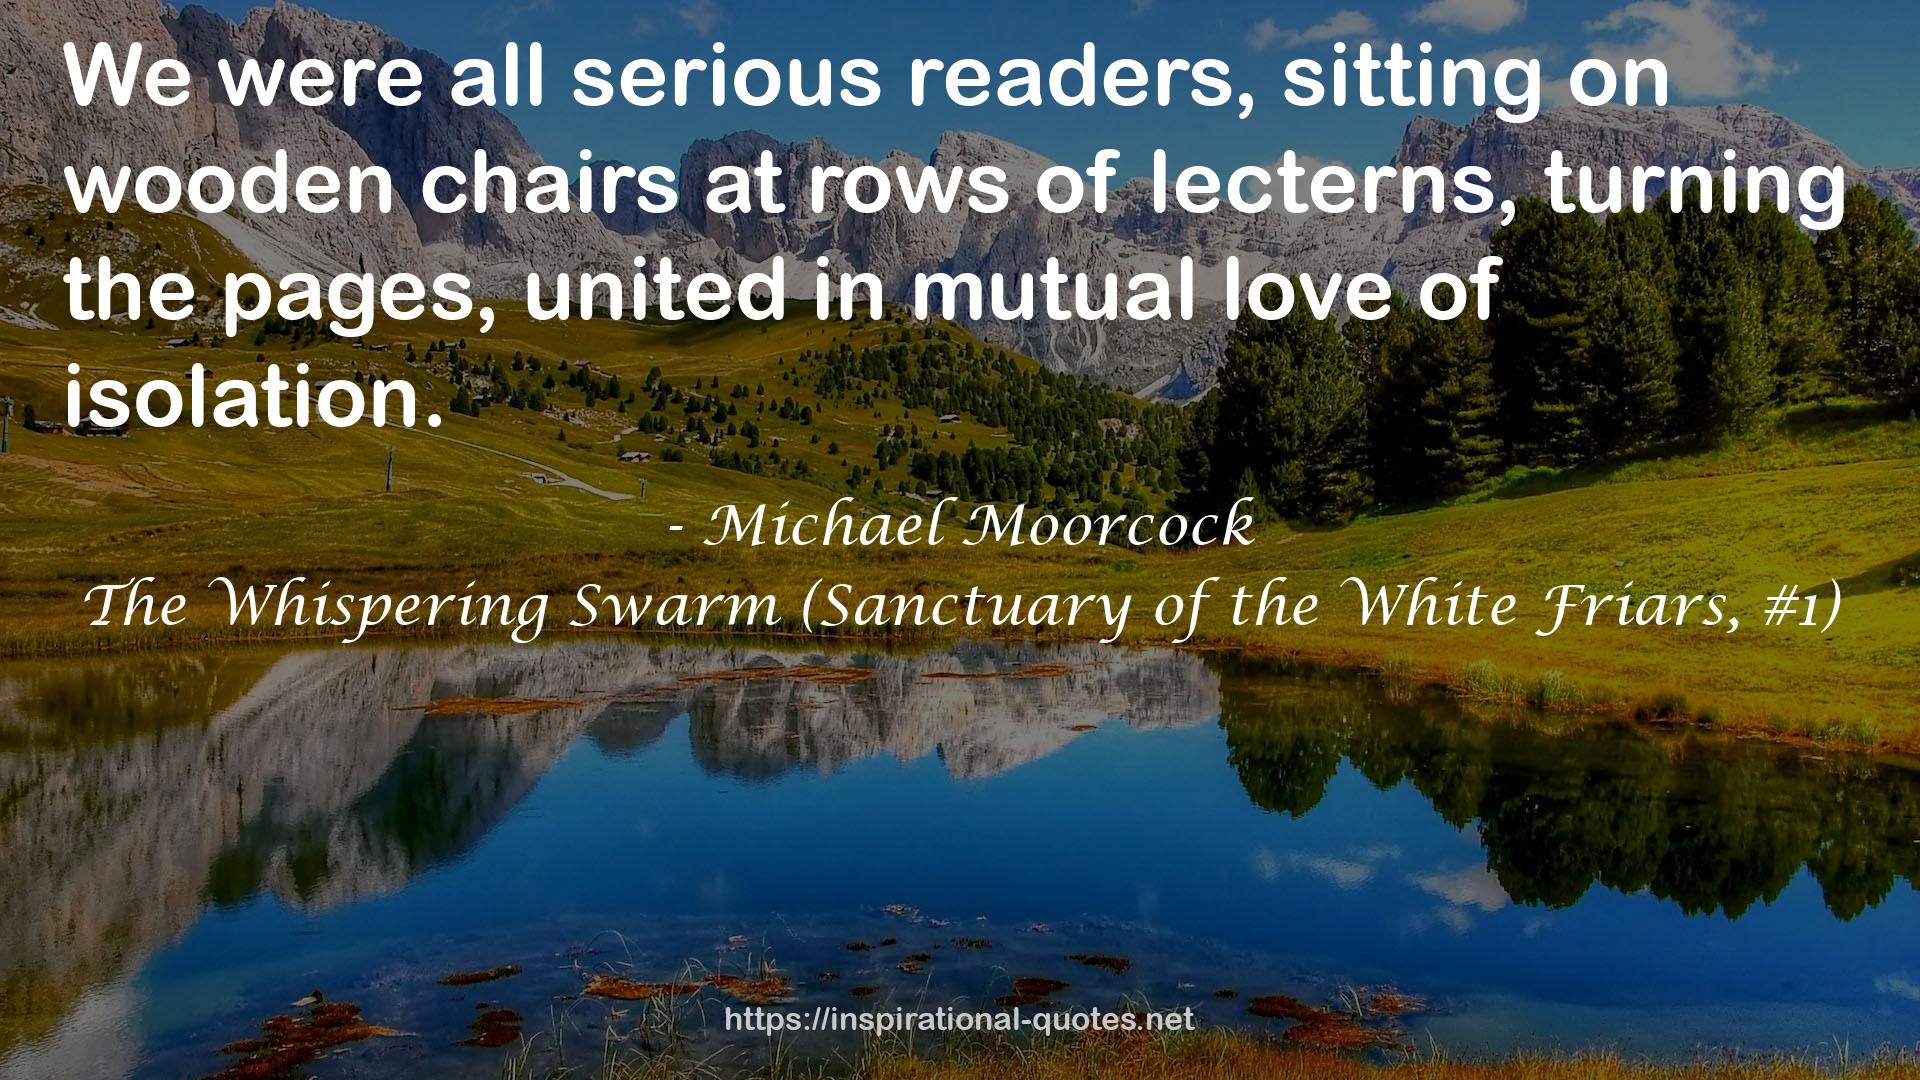 The Whispering Swarm (Sanctuary of the White Friars, #1) QUOTES